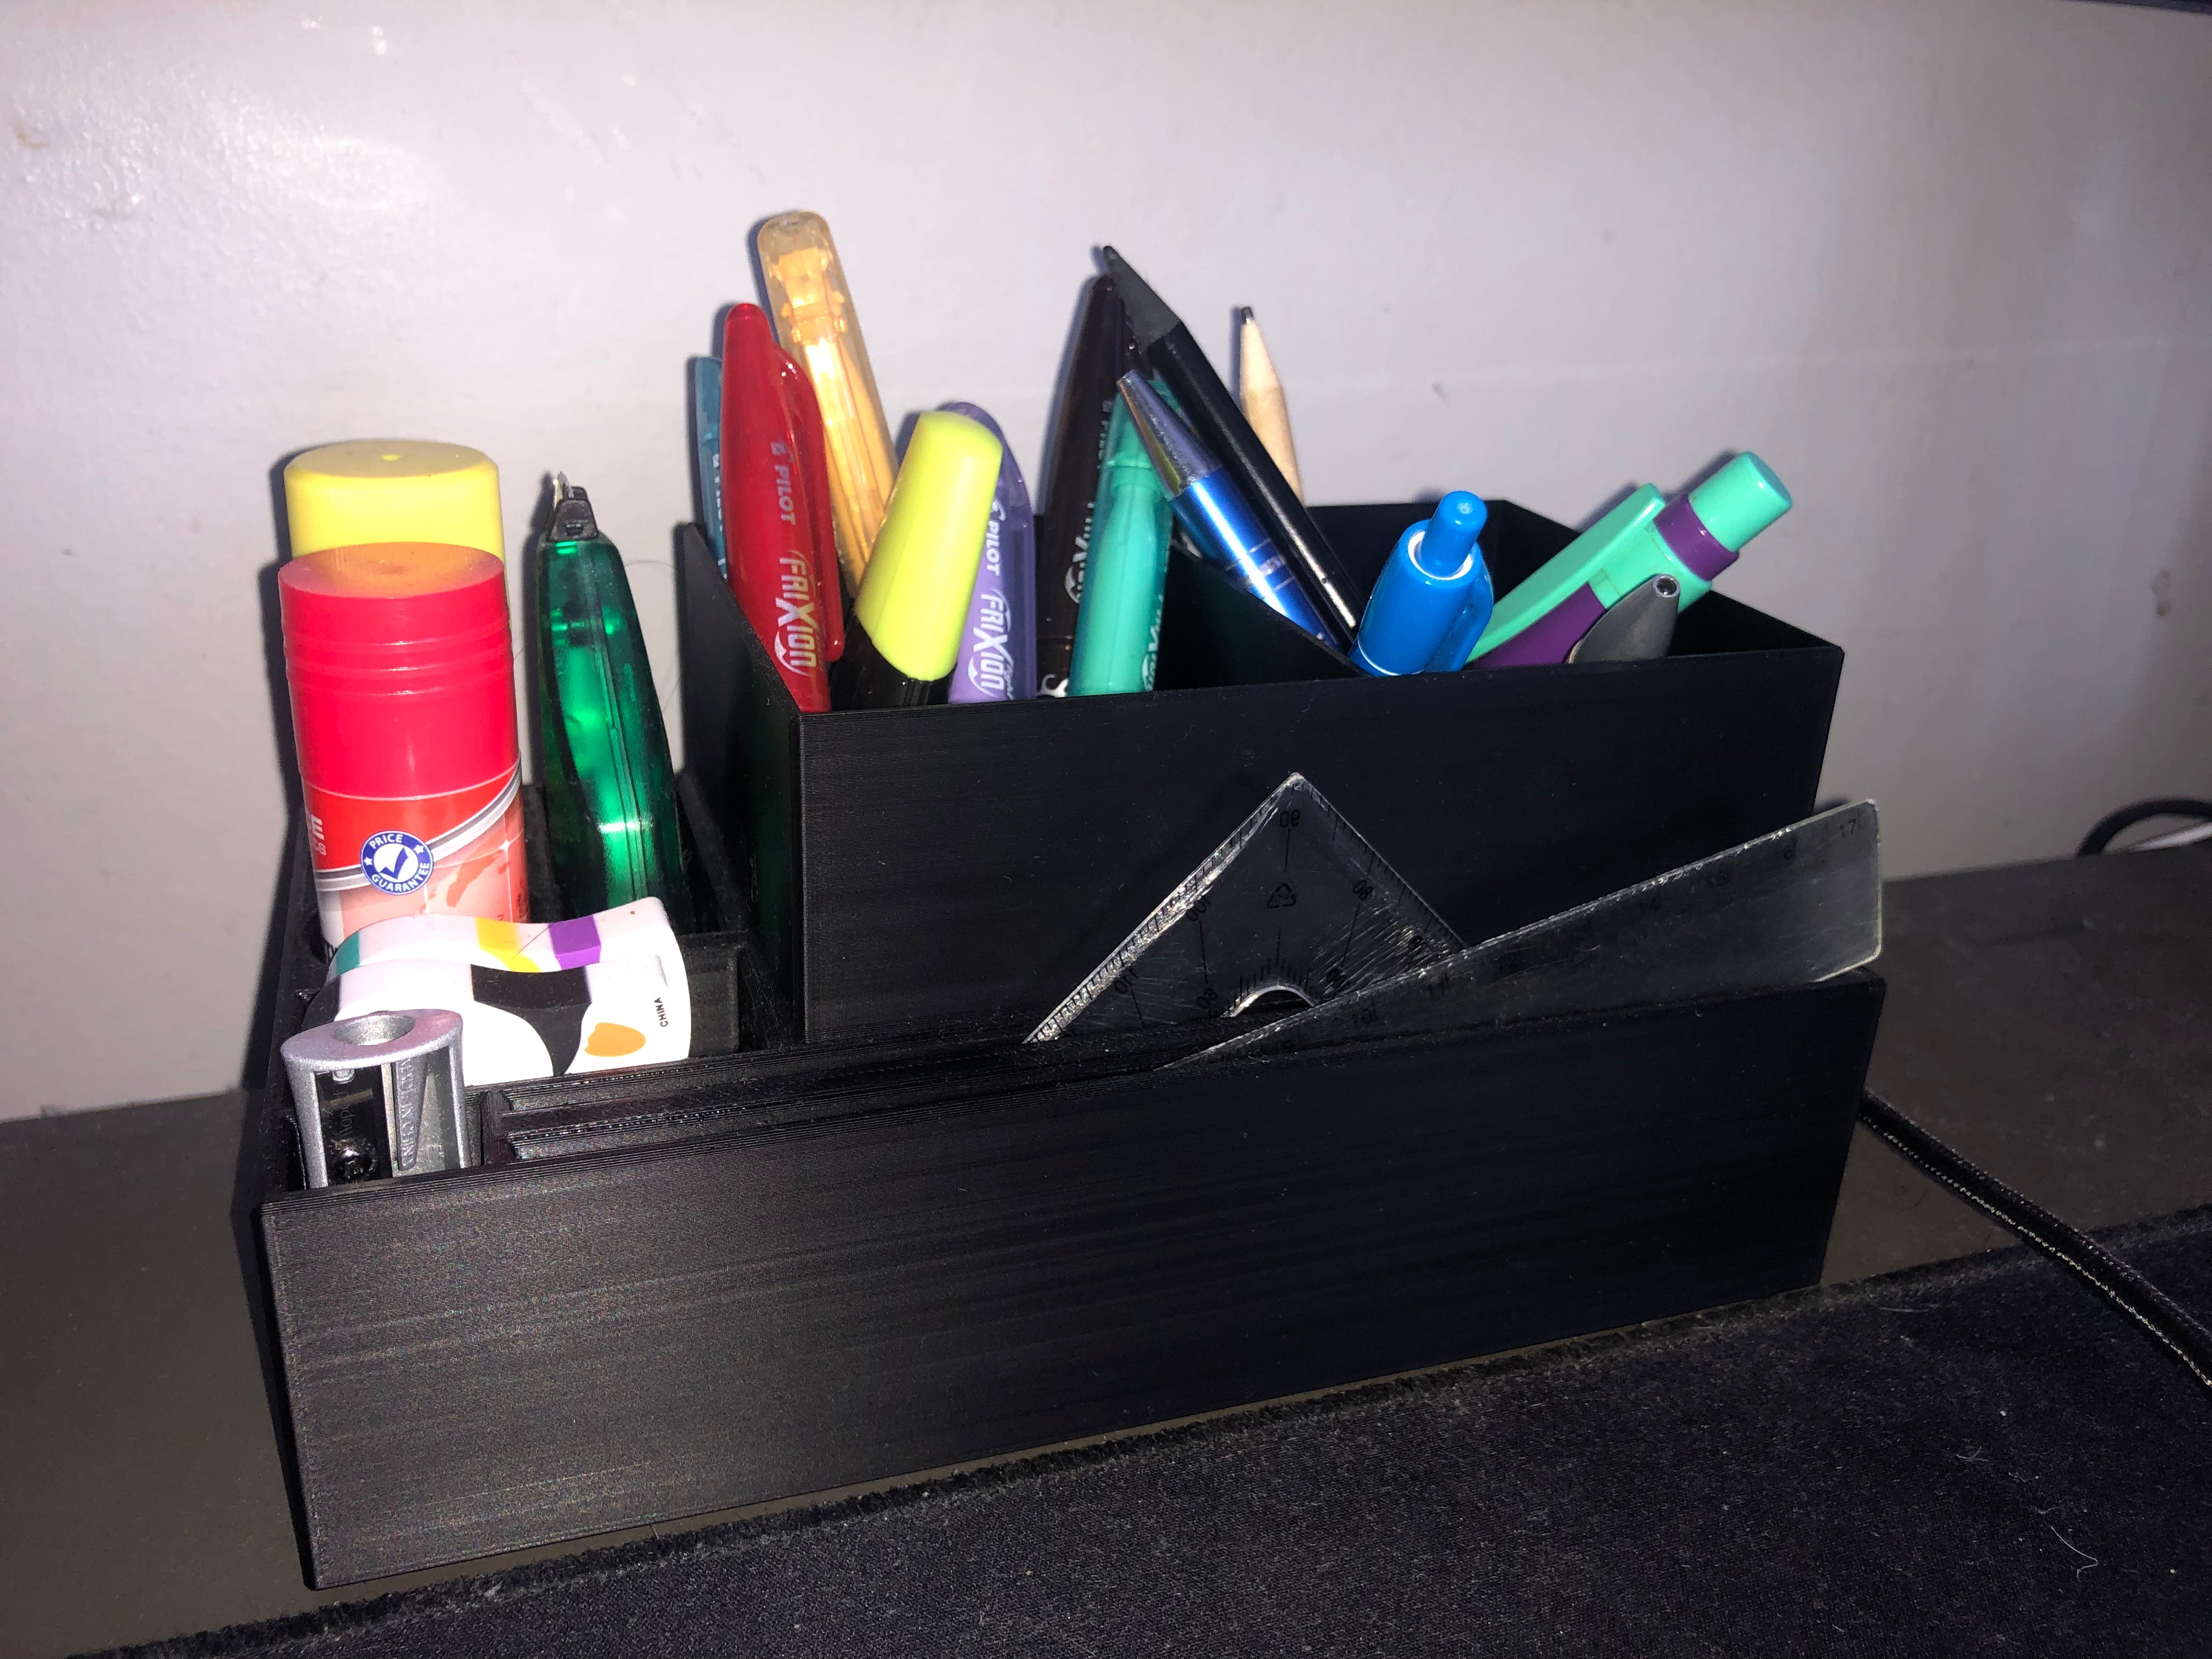 Desk organiser for pencils, pens and office supplies